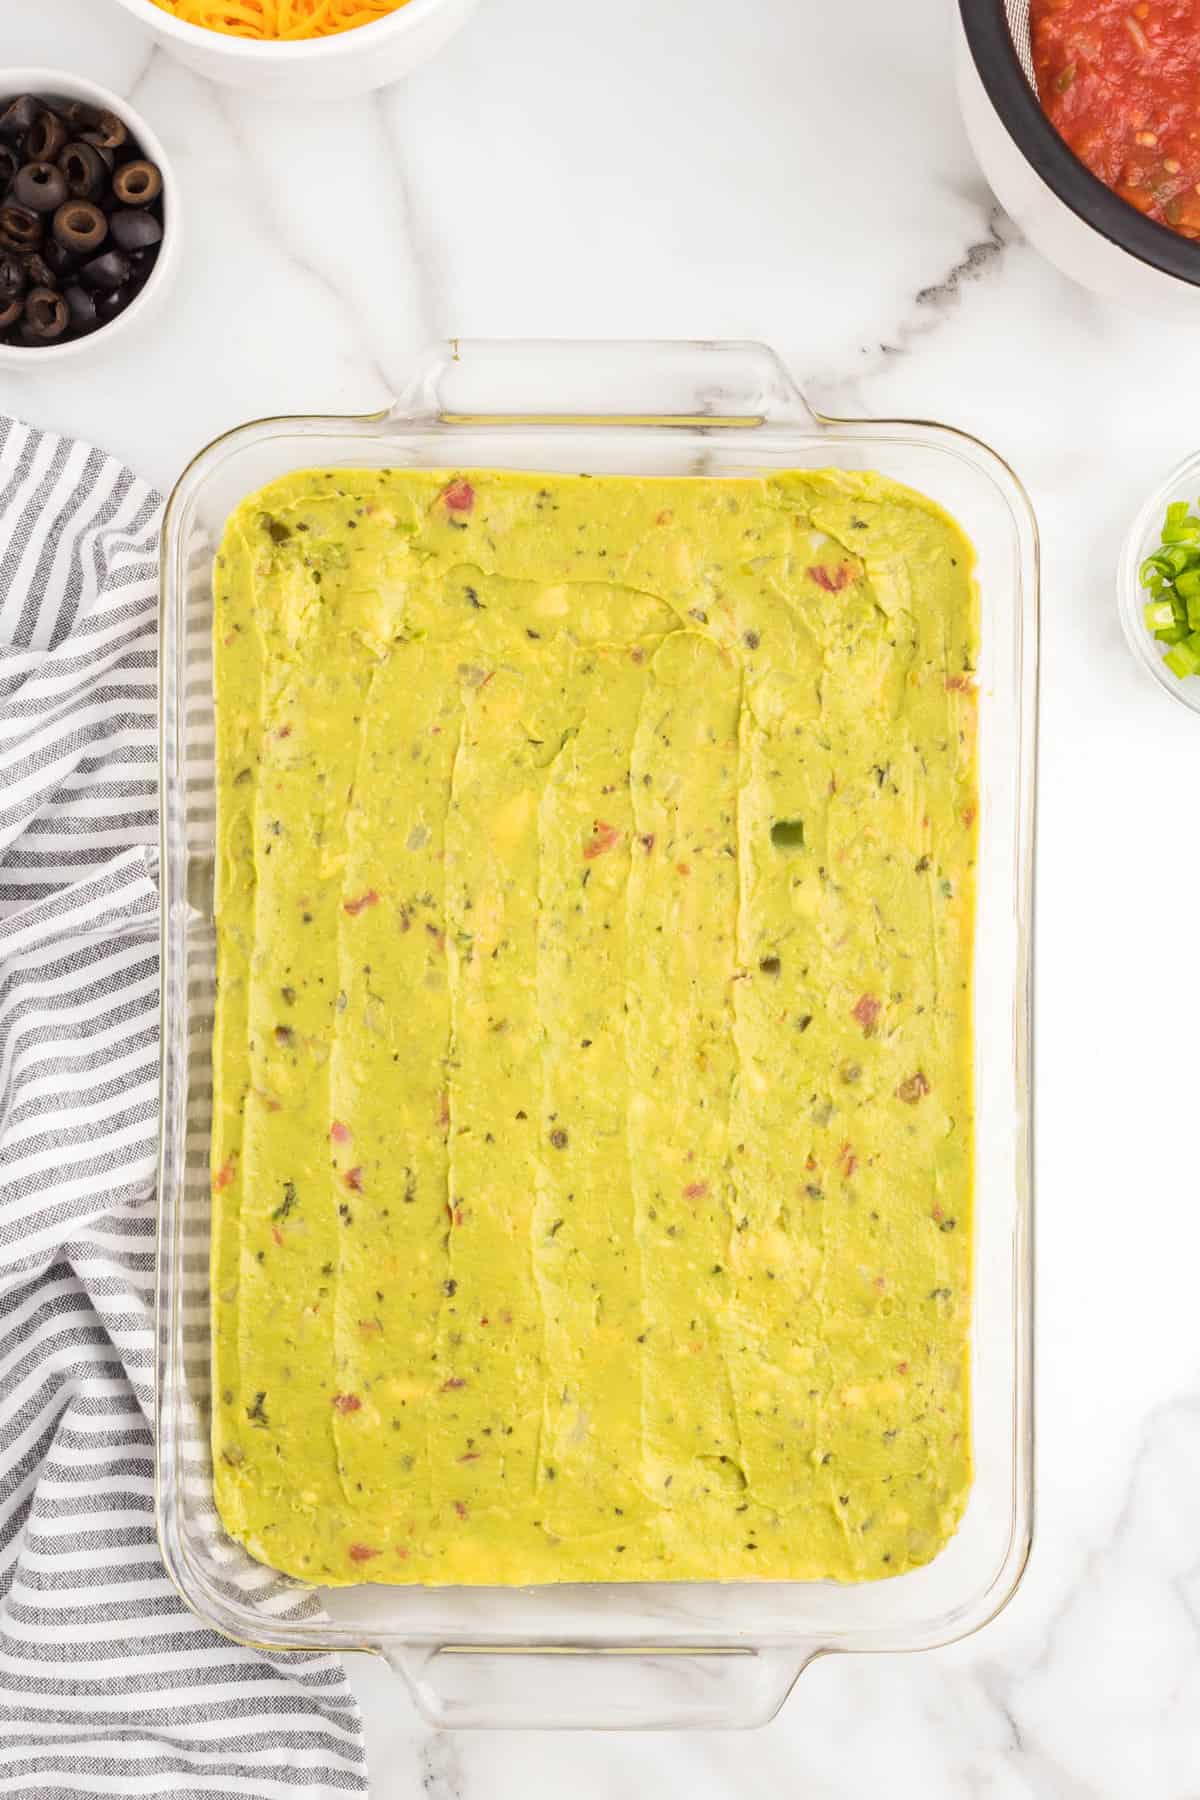 Guacamole spread evenly over refried beans for seven layer taco dip